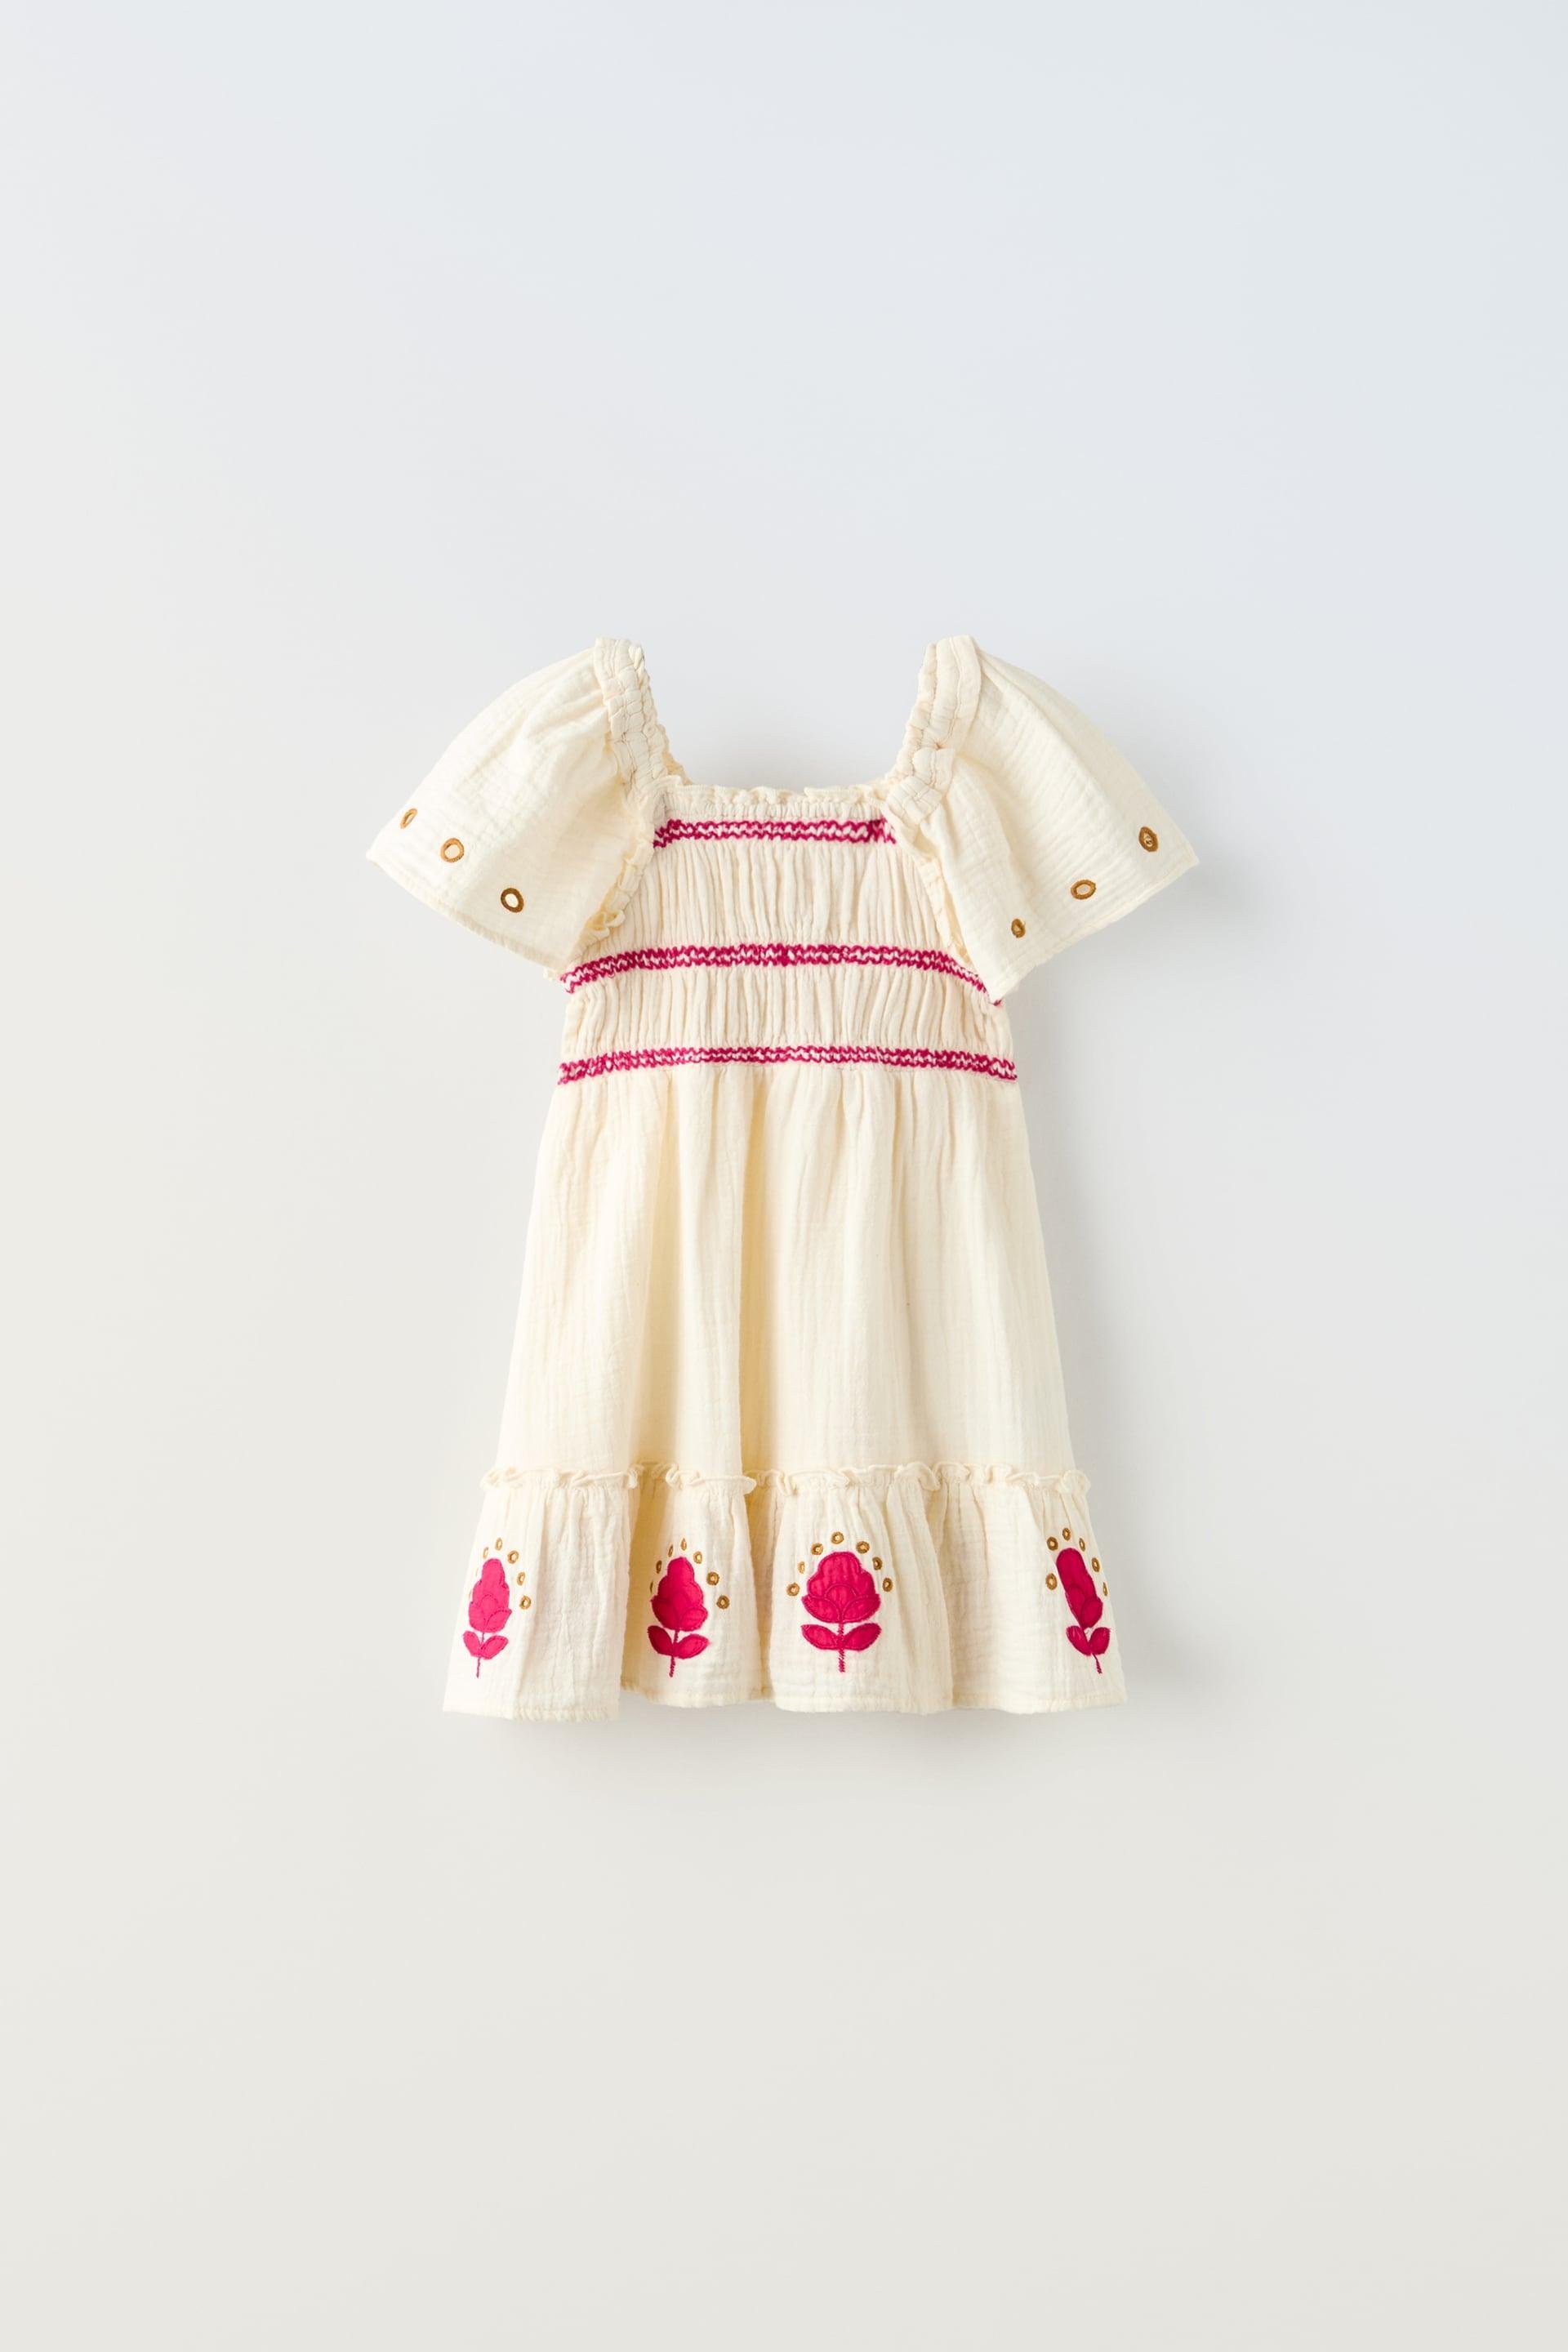 EMBROIDERED MOTIF DRESS by ZARA